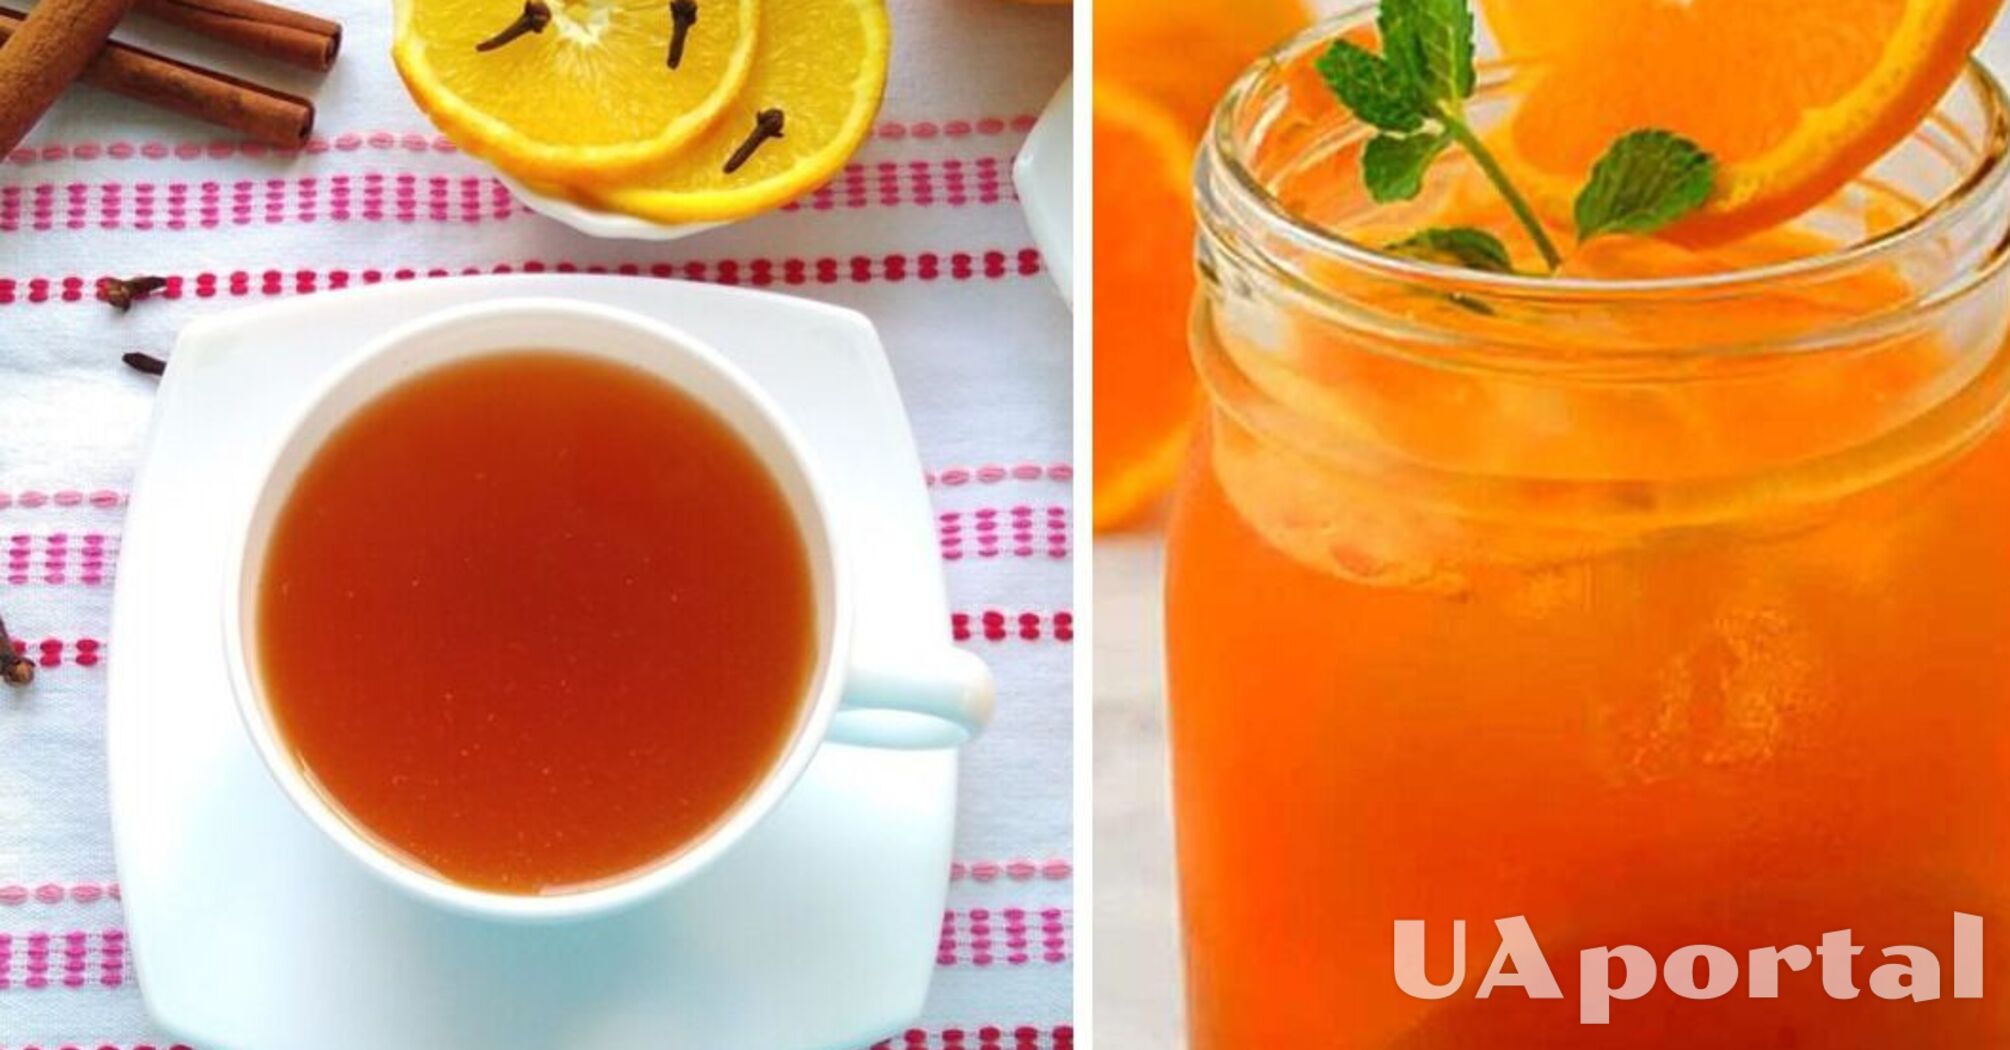 Guests will be delighted: a recipe for orange tea